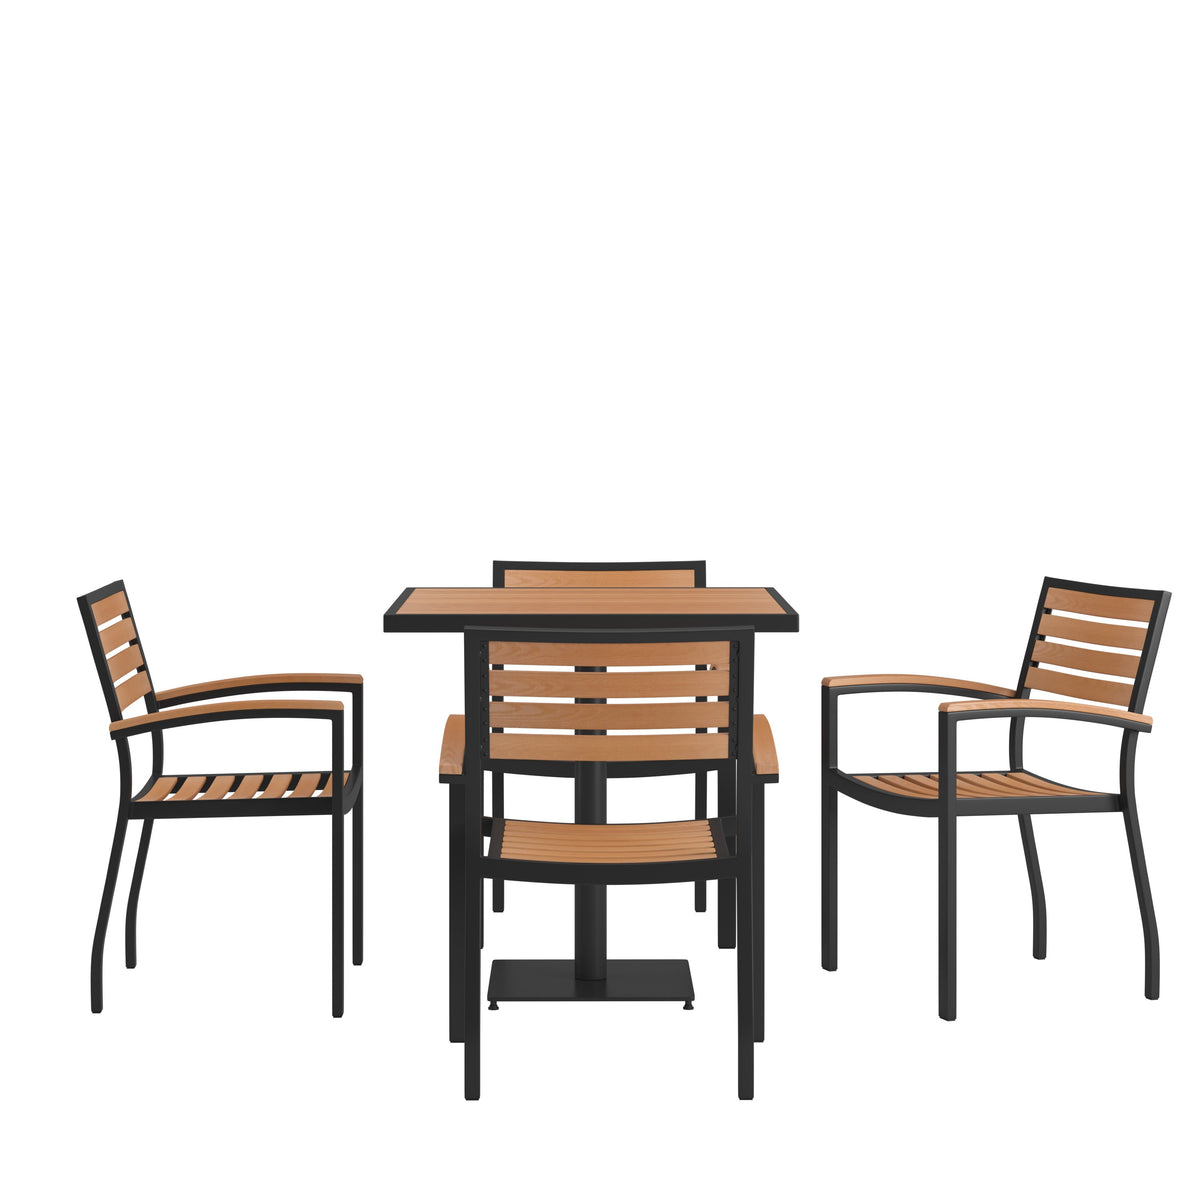 4 Faux Teak Accented Club Chairs and 30inch Square Faux Teak Patio Table Set